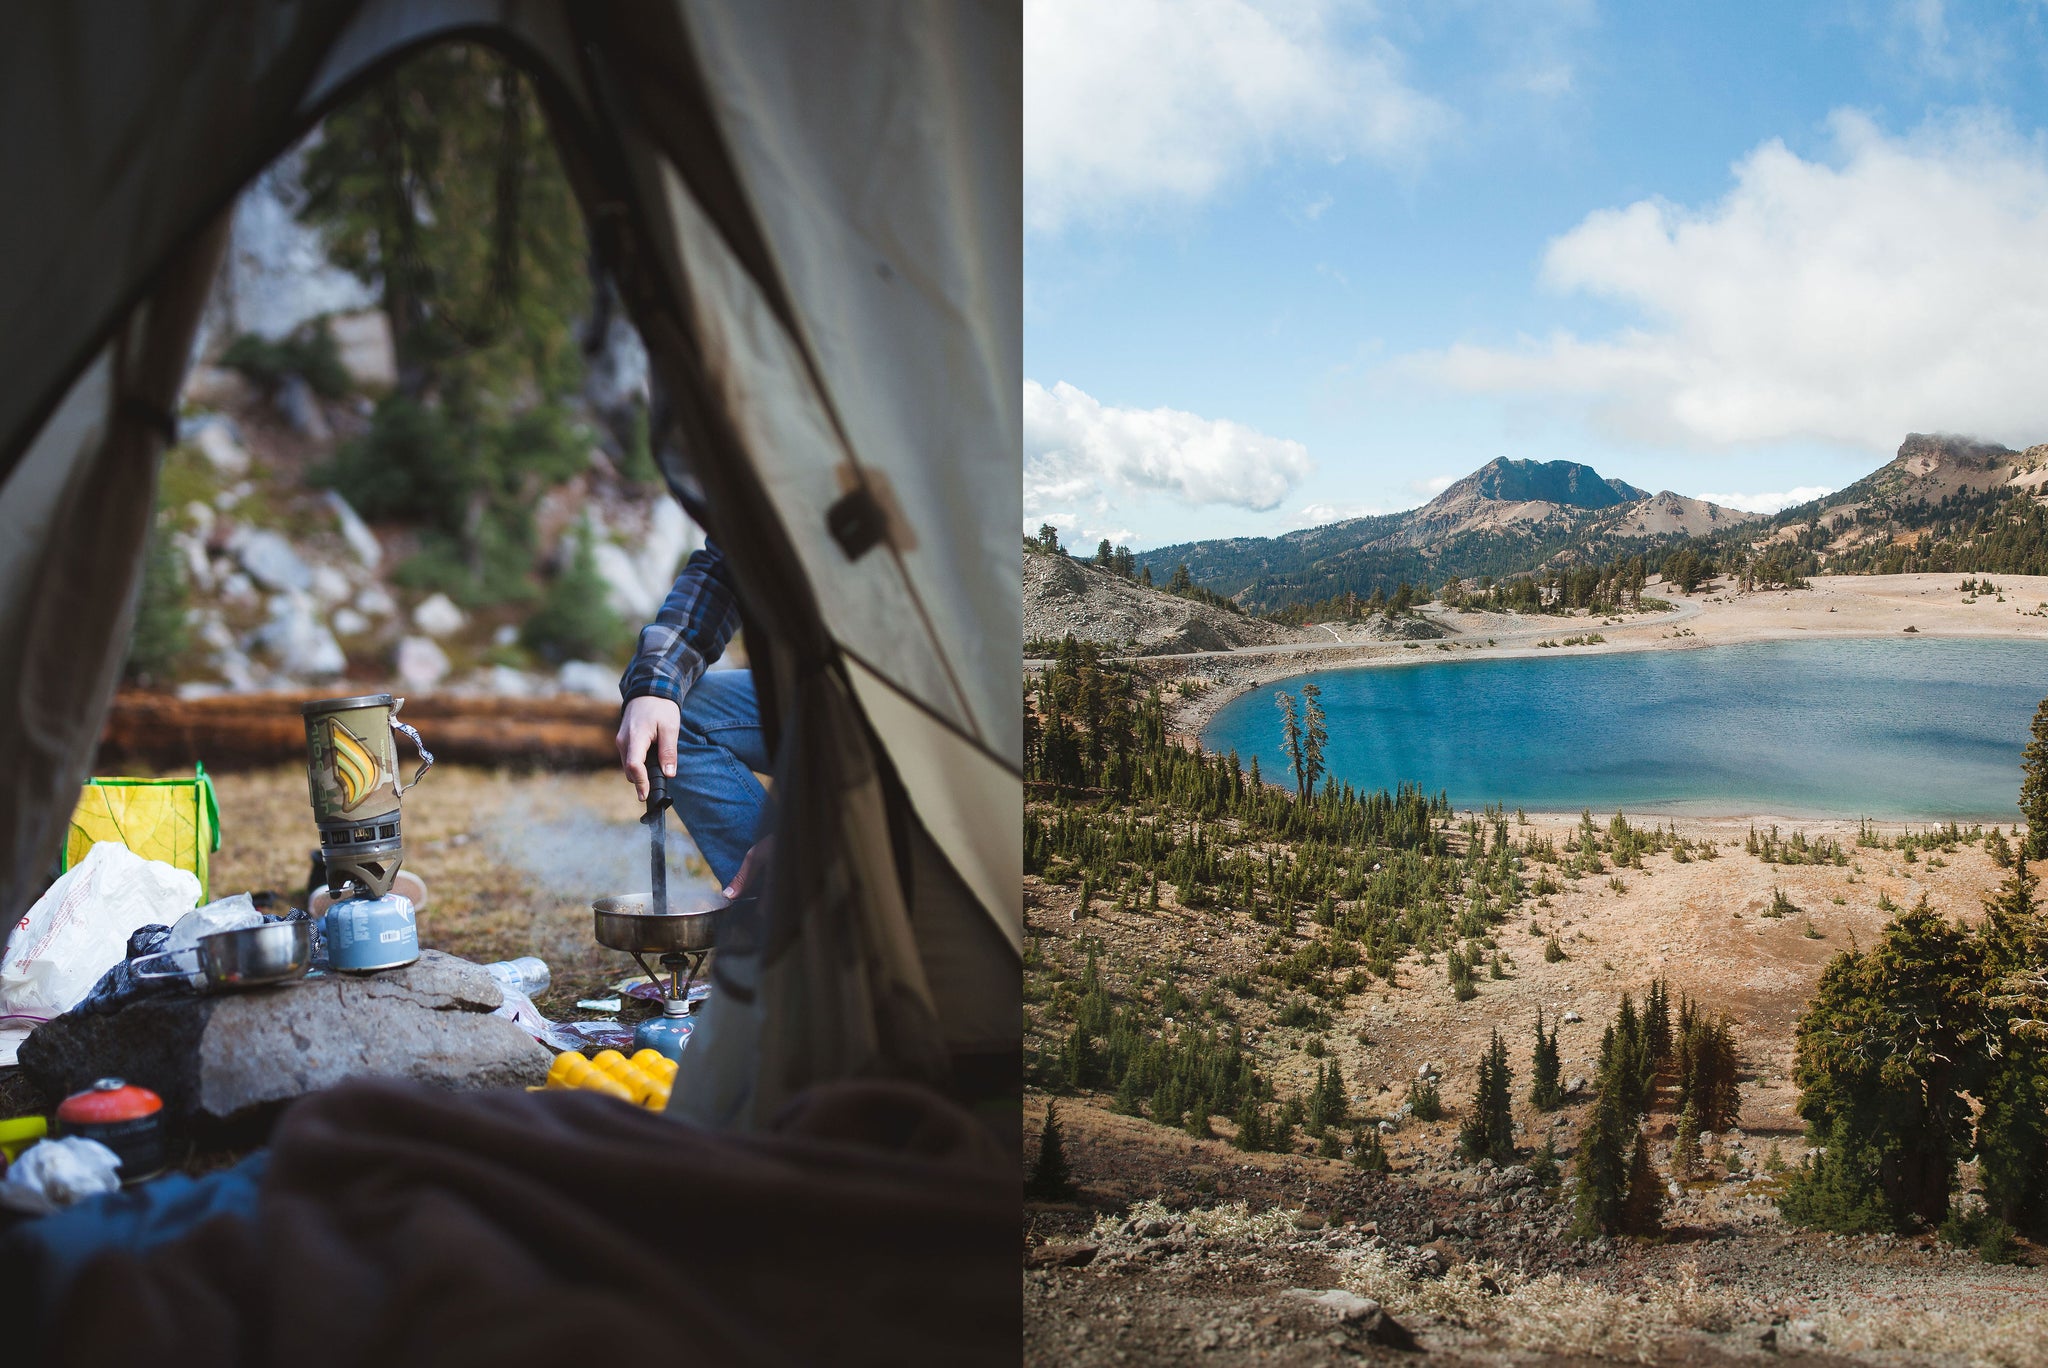 Camping trips in Lassen Park for Bather's Excellent Adventures travel series